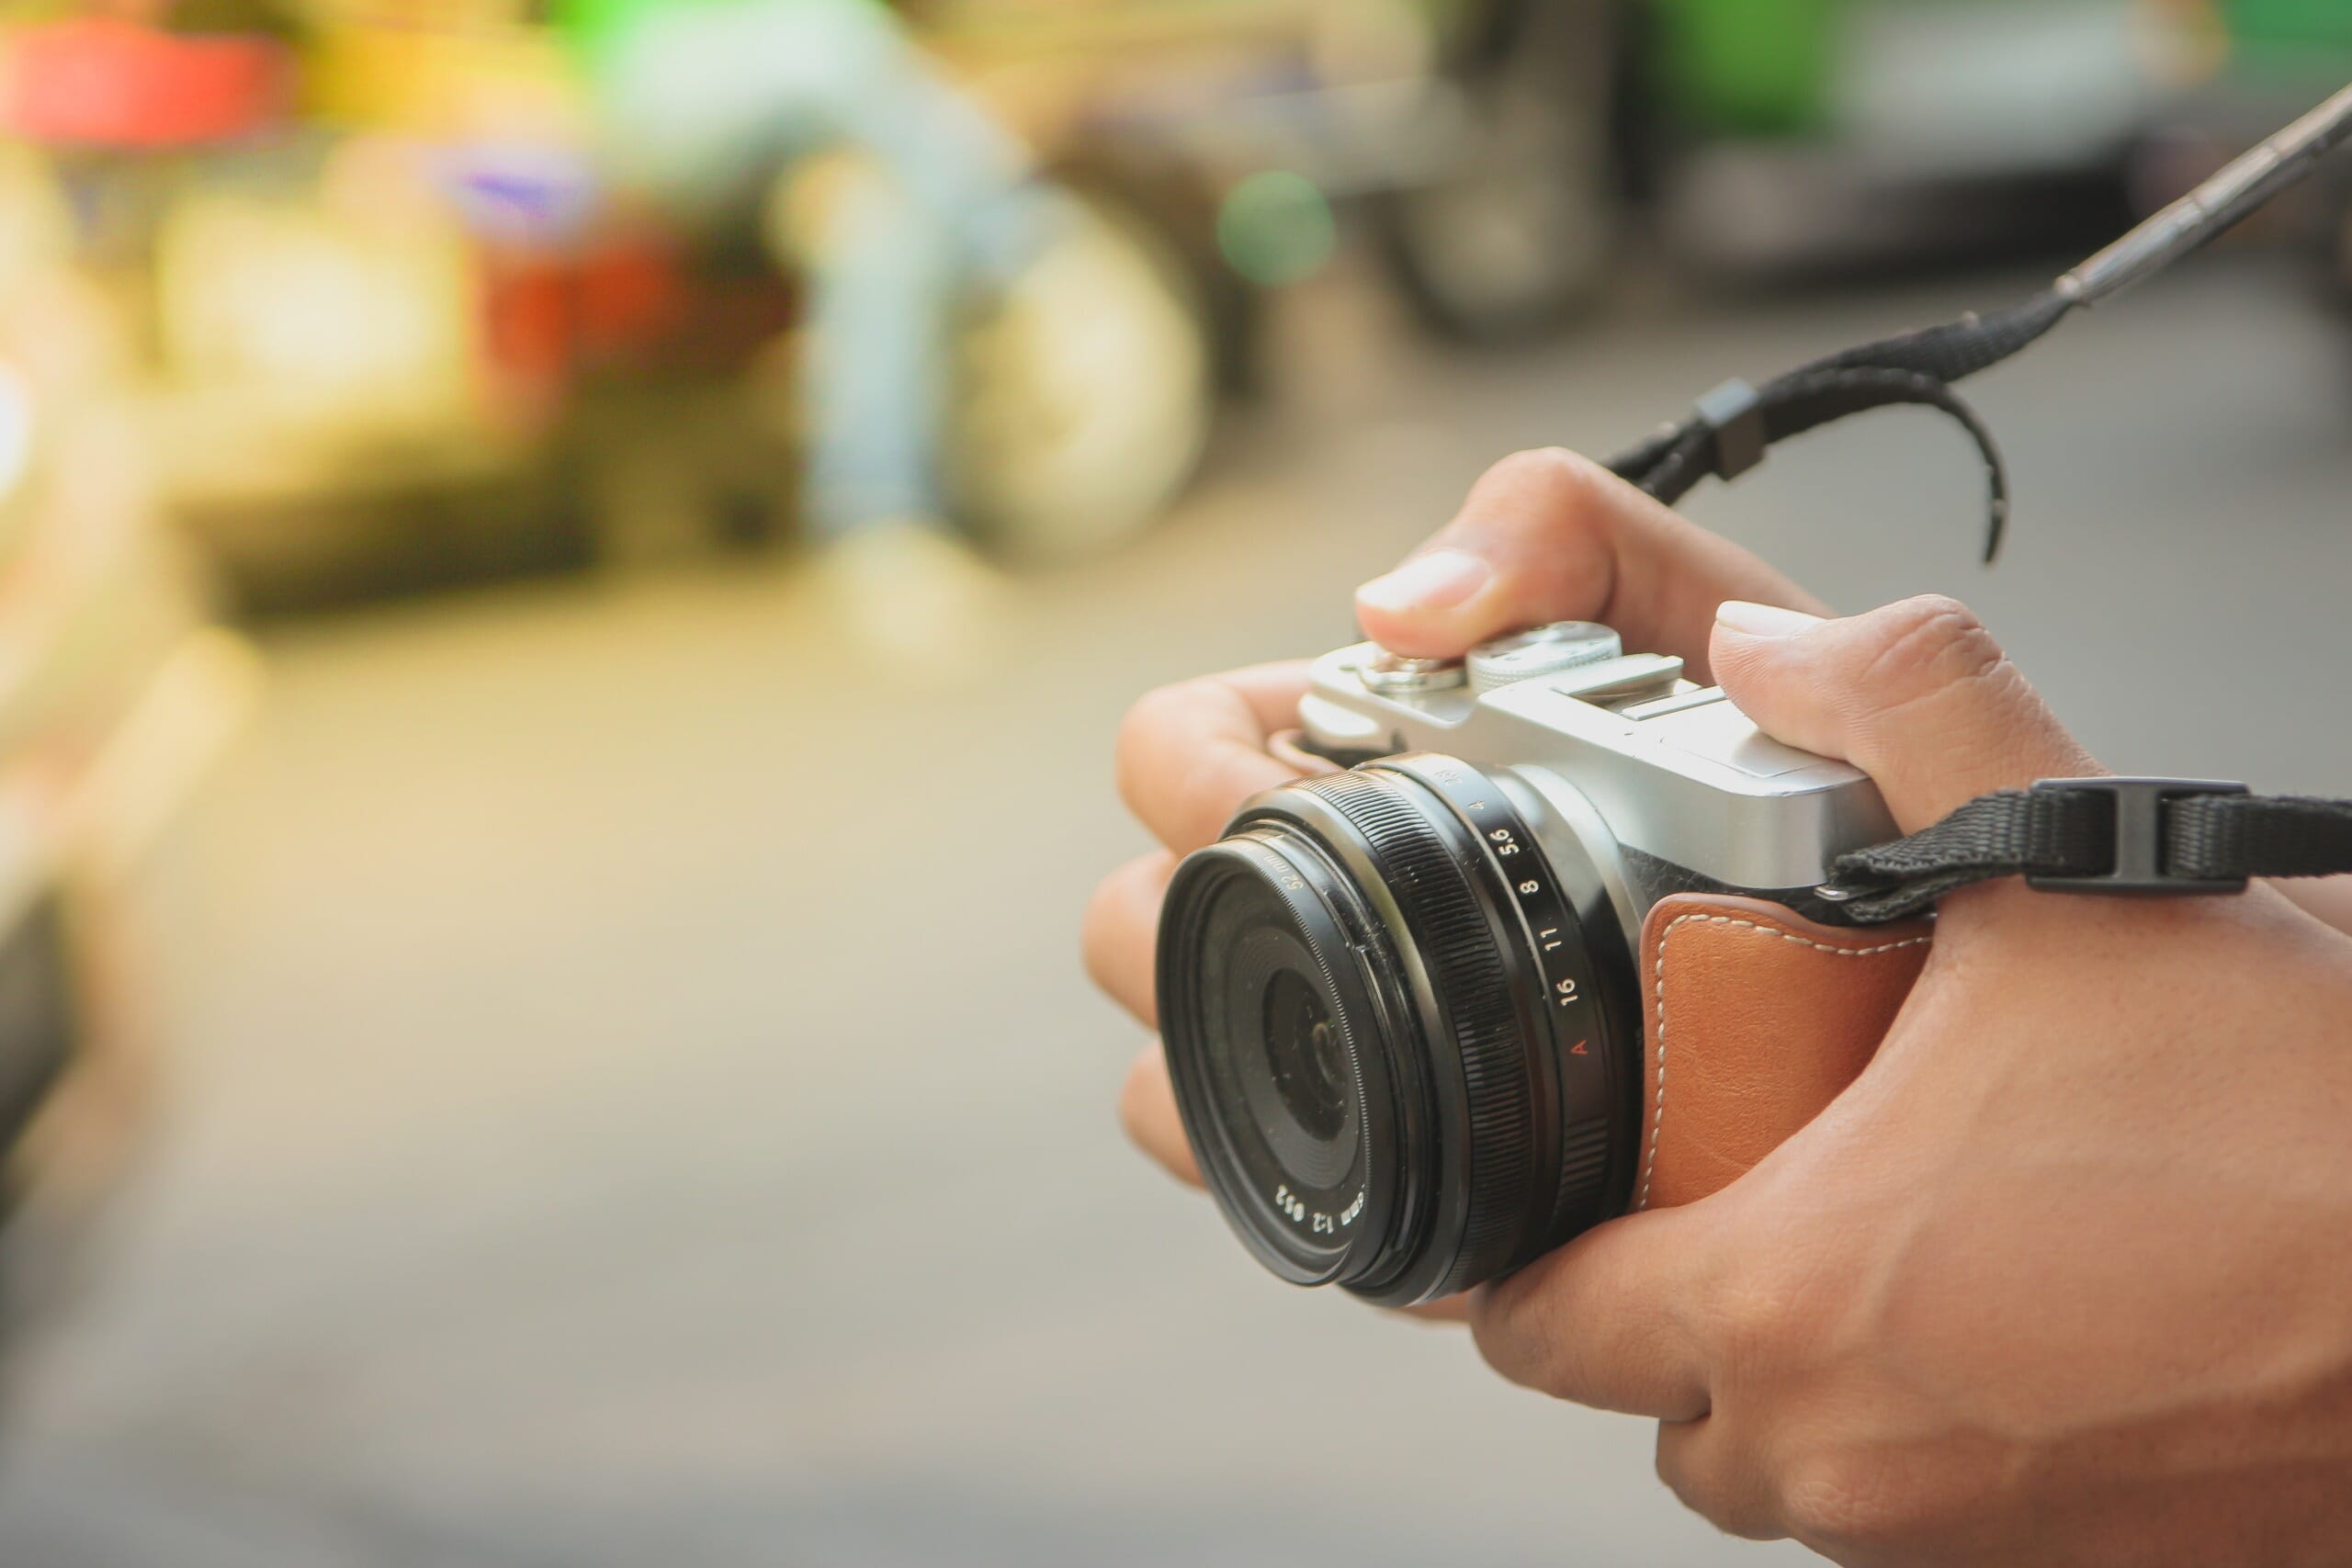 Best Mirrorless Cameras for Beginners (8 Amazing Options)